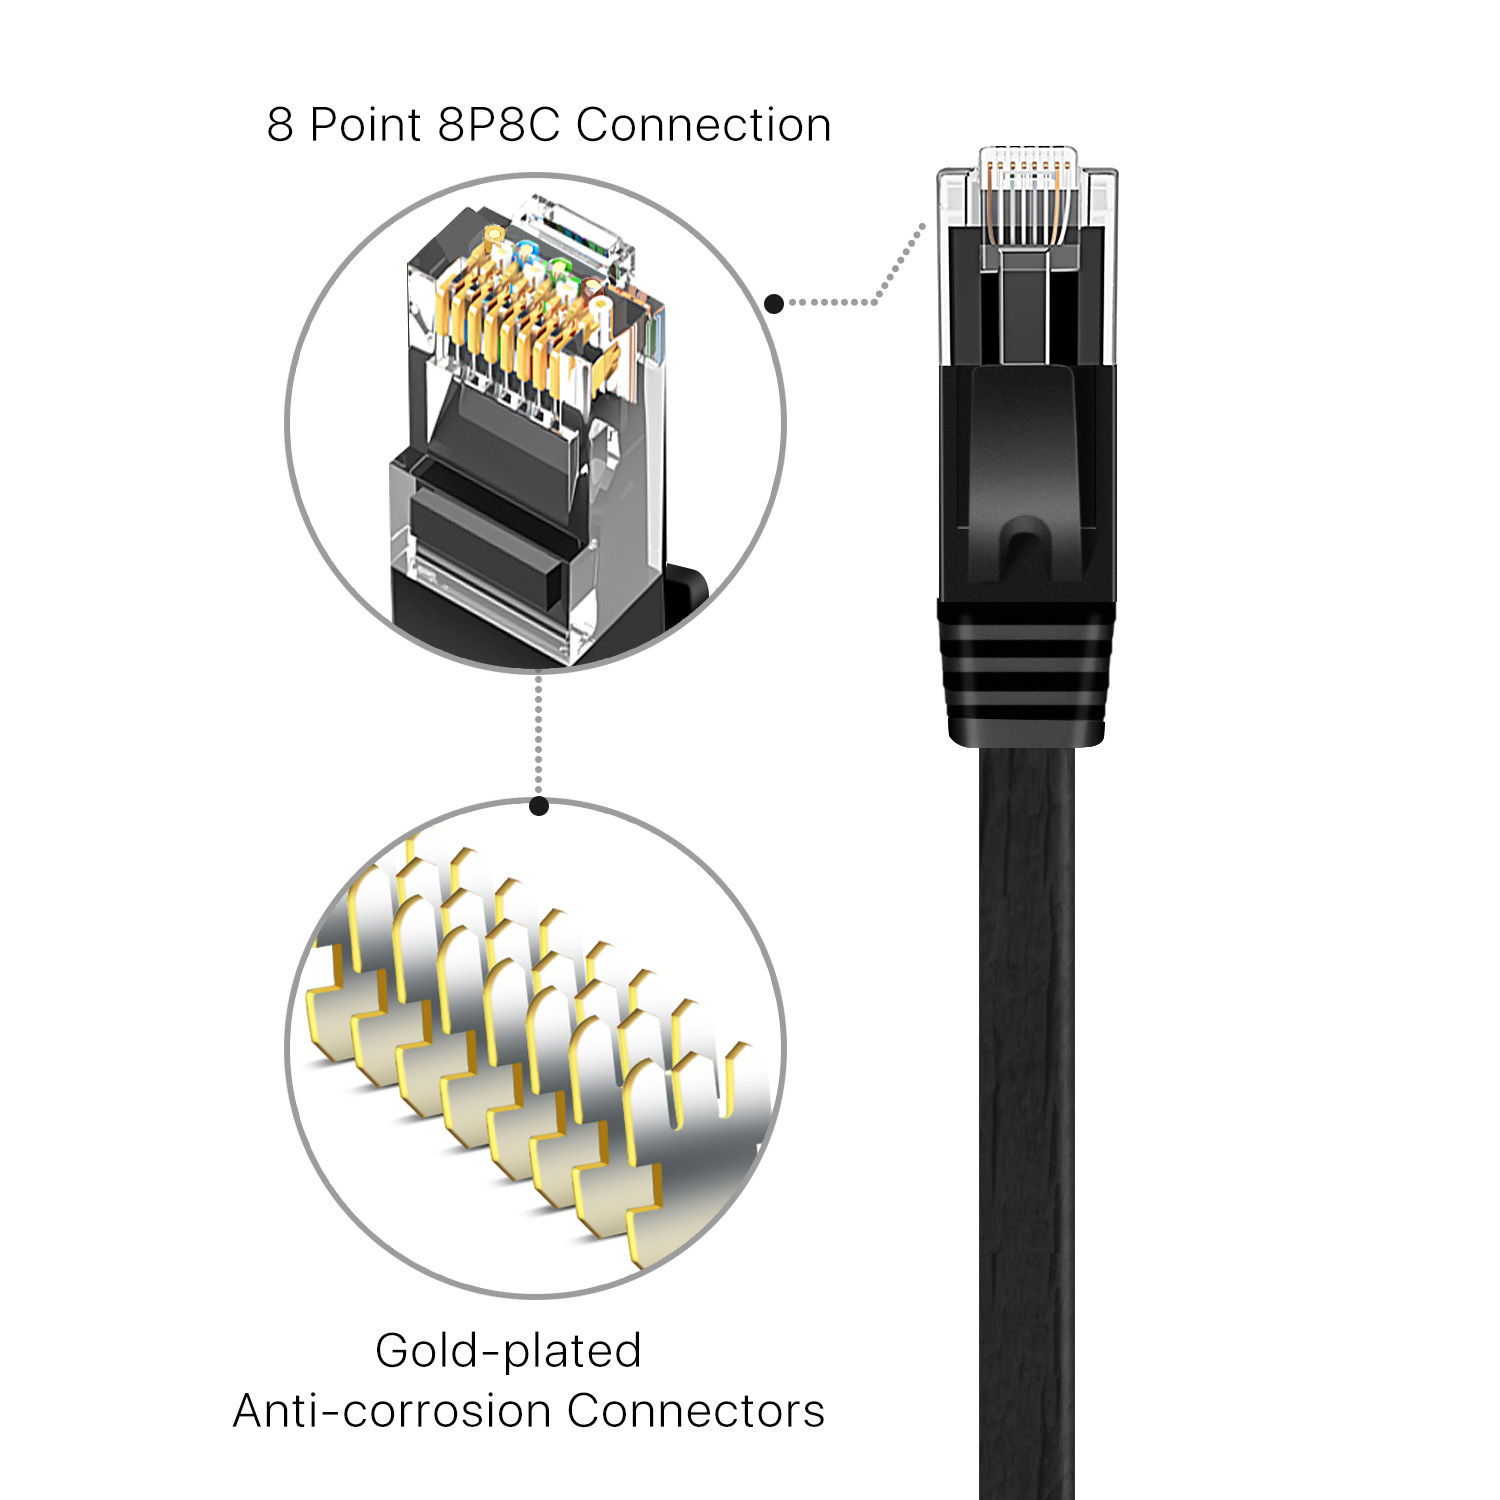 The connectors with gold-plated contacts, molded strain-relief boots, and snagless molds, provide durability, and ensure a secure connection; Backward compatible with Cat5e and Cat 5 environment